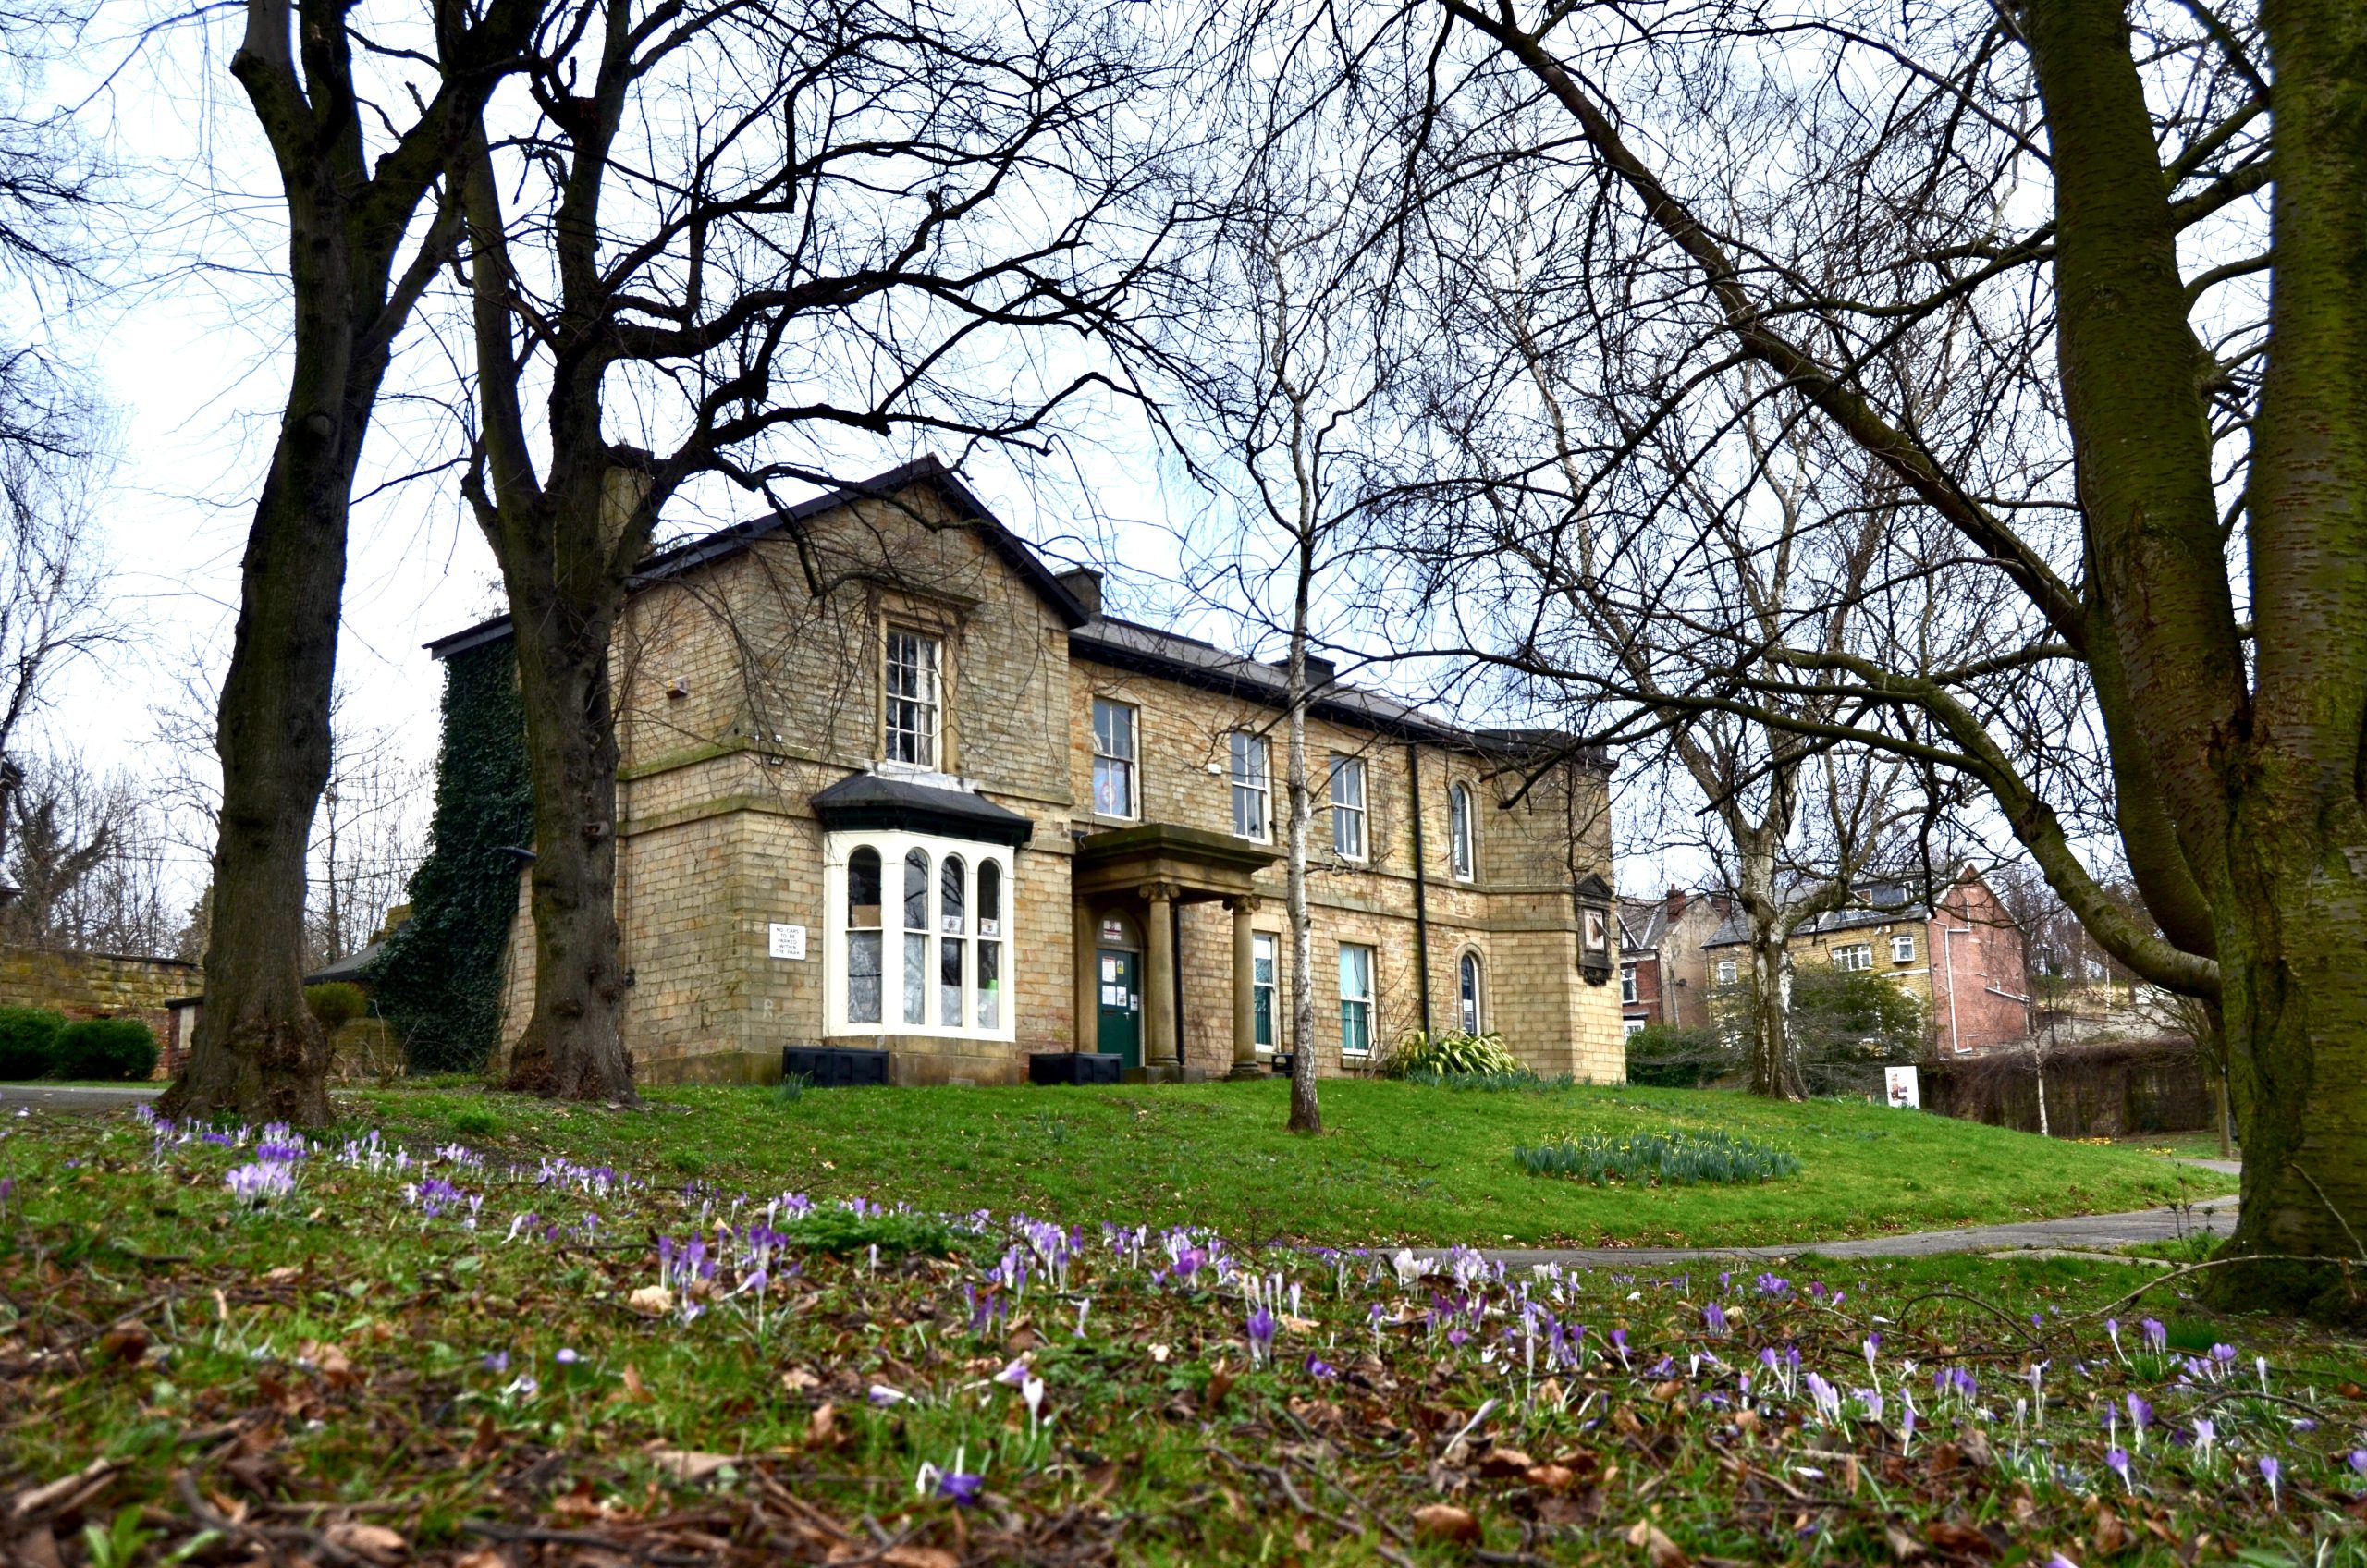 Abbeyfield House - Spring 2023 (crocuses in the foreground)